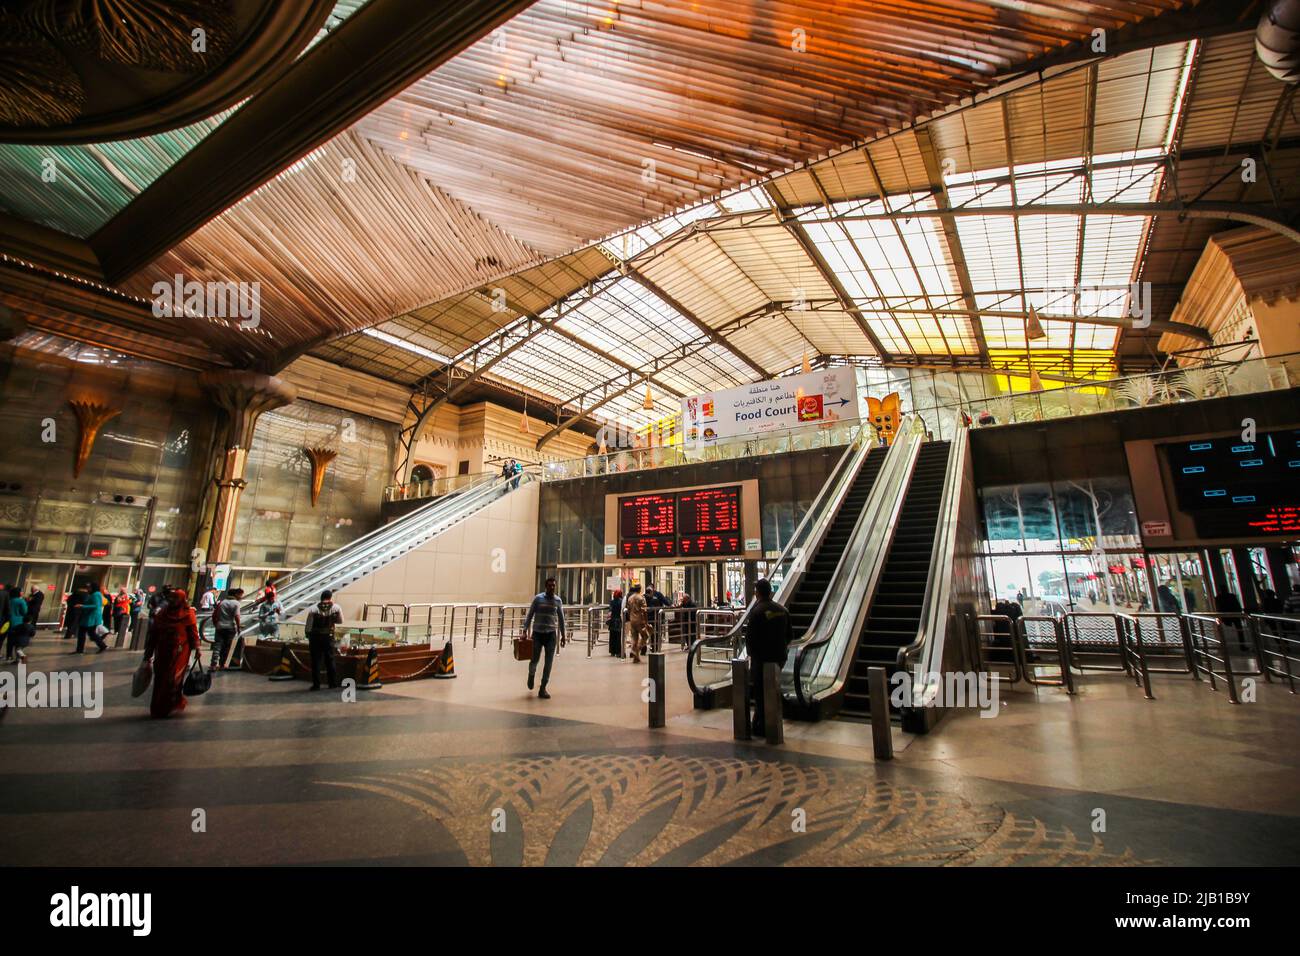 Ramses railway station in Cairo, Egypt - March 10, 2017 Inside view of Ramses railway station in Cairo, Egypt Stock Photo